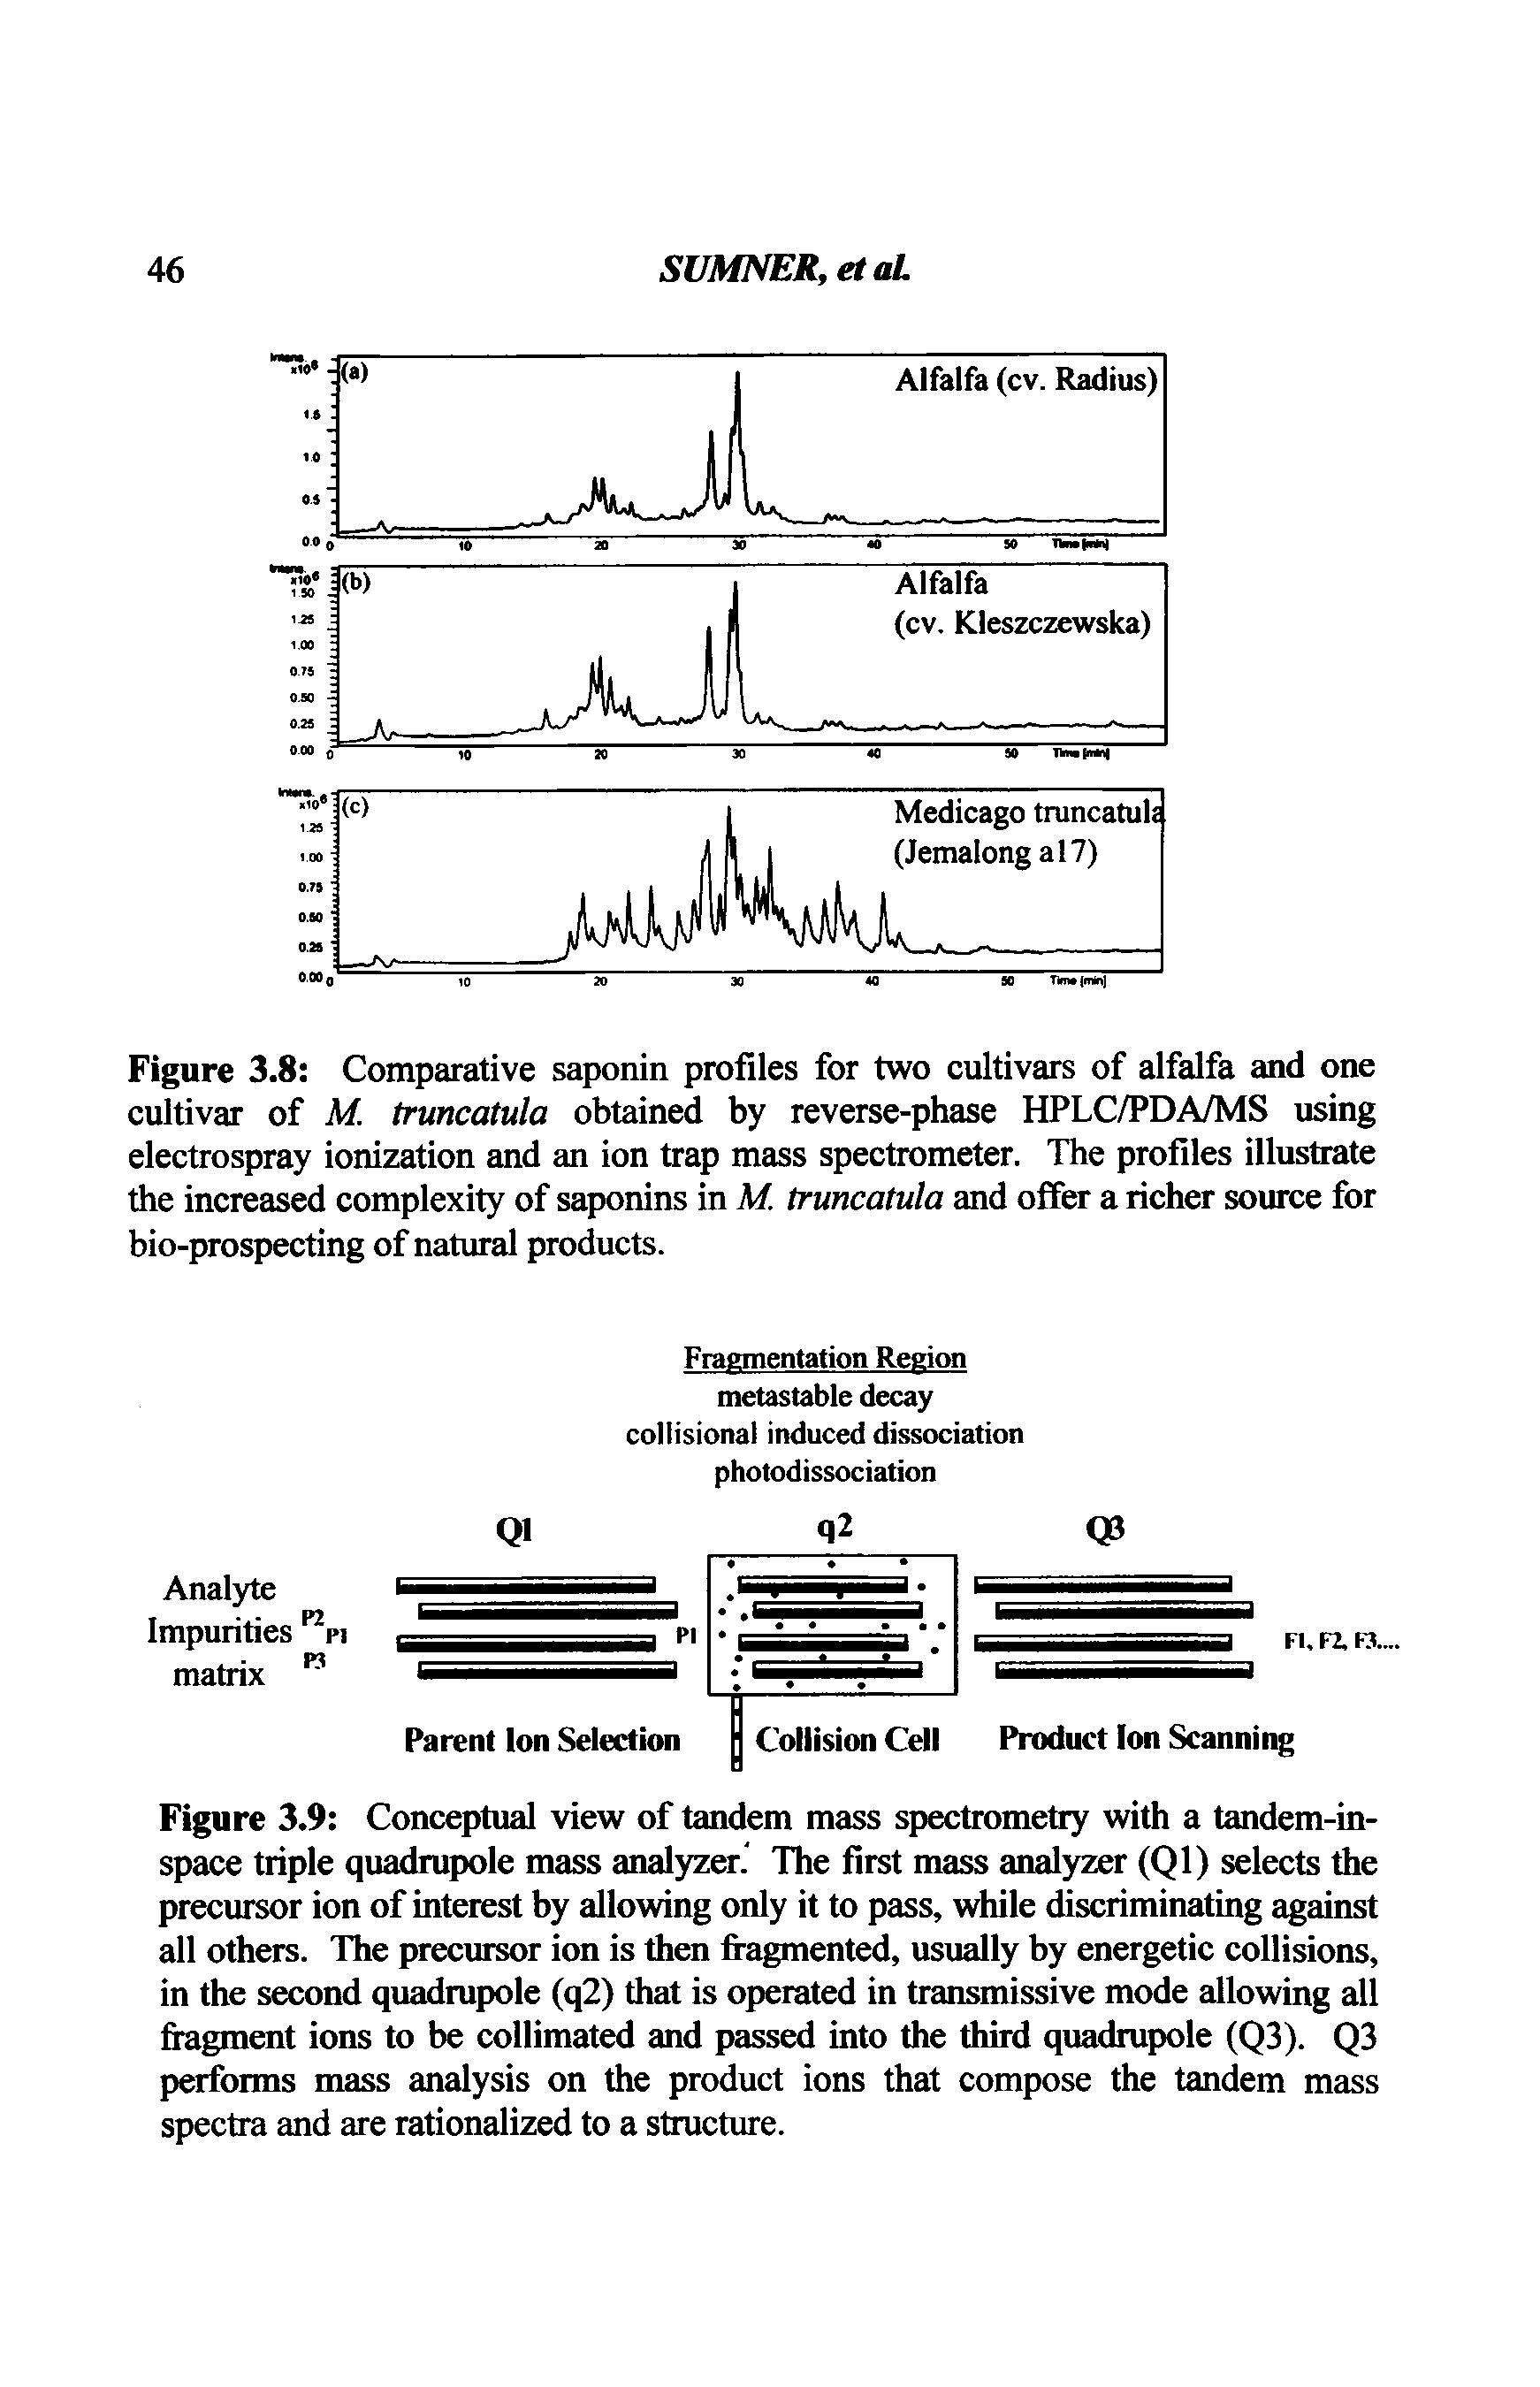 Figure 3.9 Conceptual view of tandem mass spectrometry with a tandem-inspace triple quadrupole mass analyzer." The first mass analyzer (Ql) selects the precursor ion of interest by allowing only it to pass, while discriminating against all others. The precursor ion is then fragmented, usually by energetic collisions, in the second quadrupole (q2) that is operated in transmissive mode allowing all fragment ions to be collimated and passed into the third quadrupole (Q3). Q3 performs mass analysis on the product ions that compose the tandem mass spectra and are rationalized to a structure.